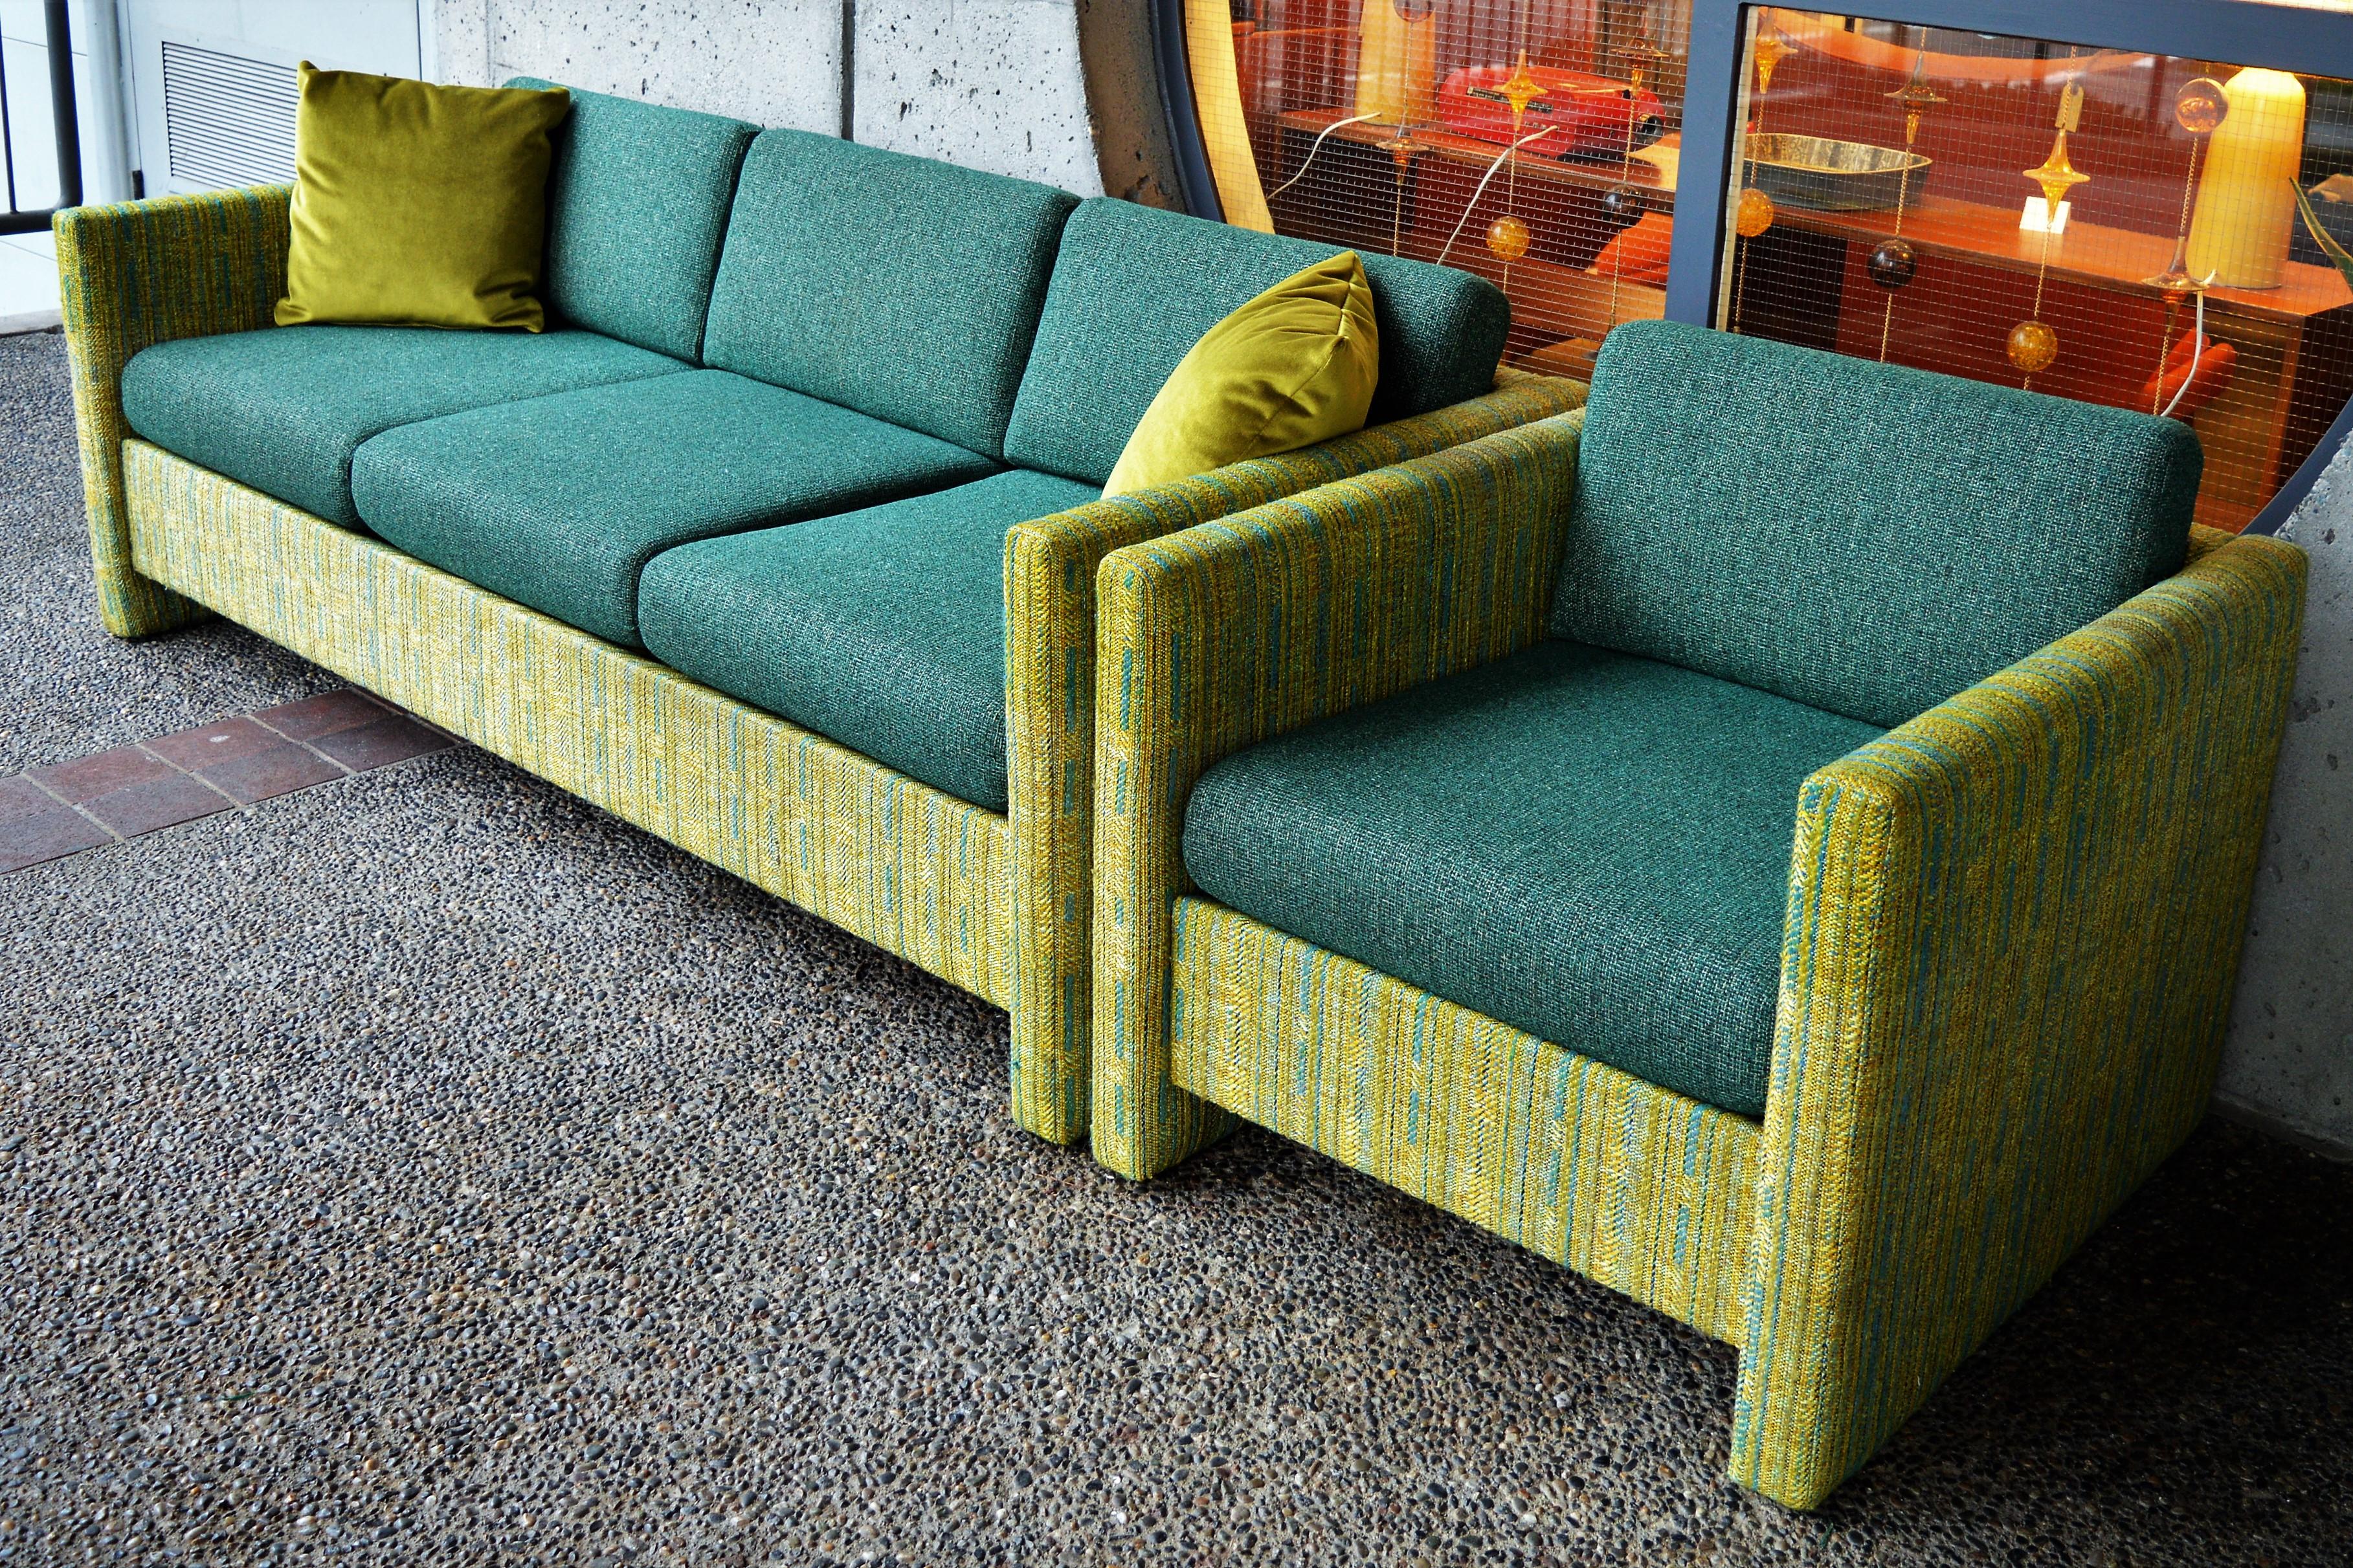 Midcentury Sofa and Club Chair in Teal Wool Cushions with Contrasting Print 3